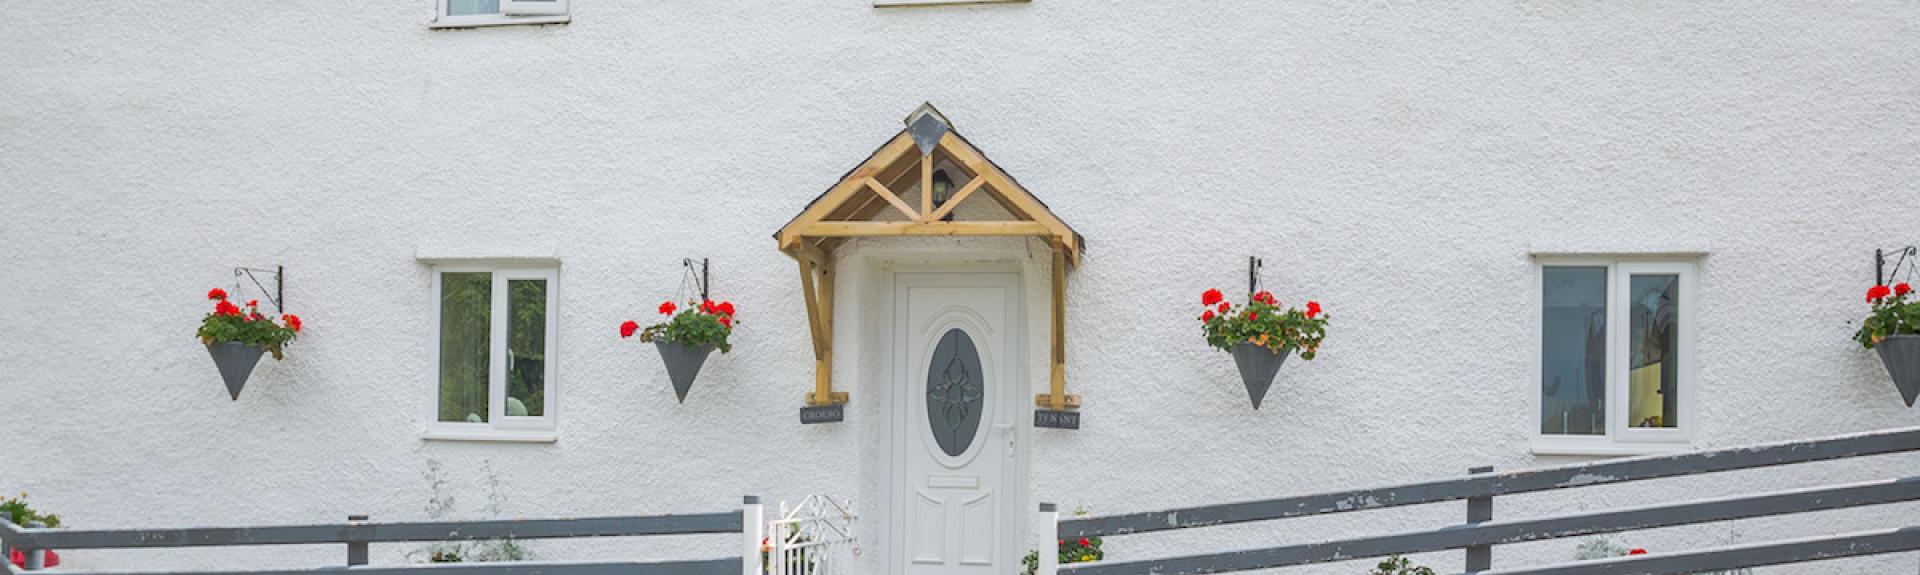 Front exterior of a double-fronted2-storey  Welsh holiday cottage with wall-mounted flowerpots and a wooden fence.